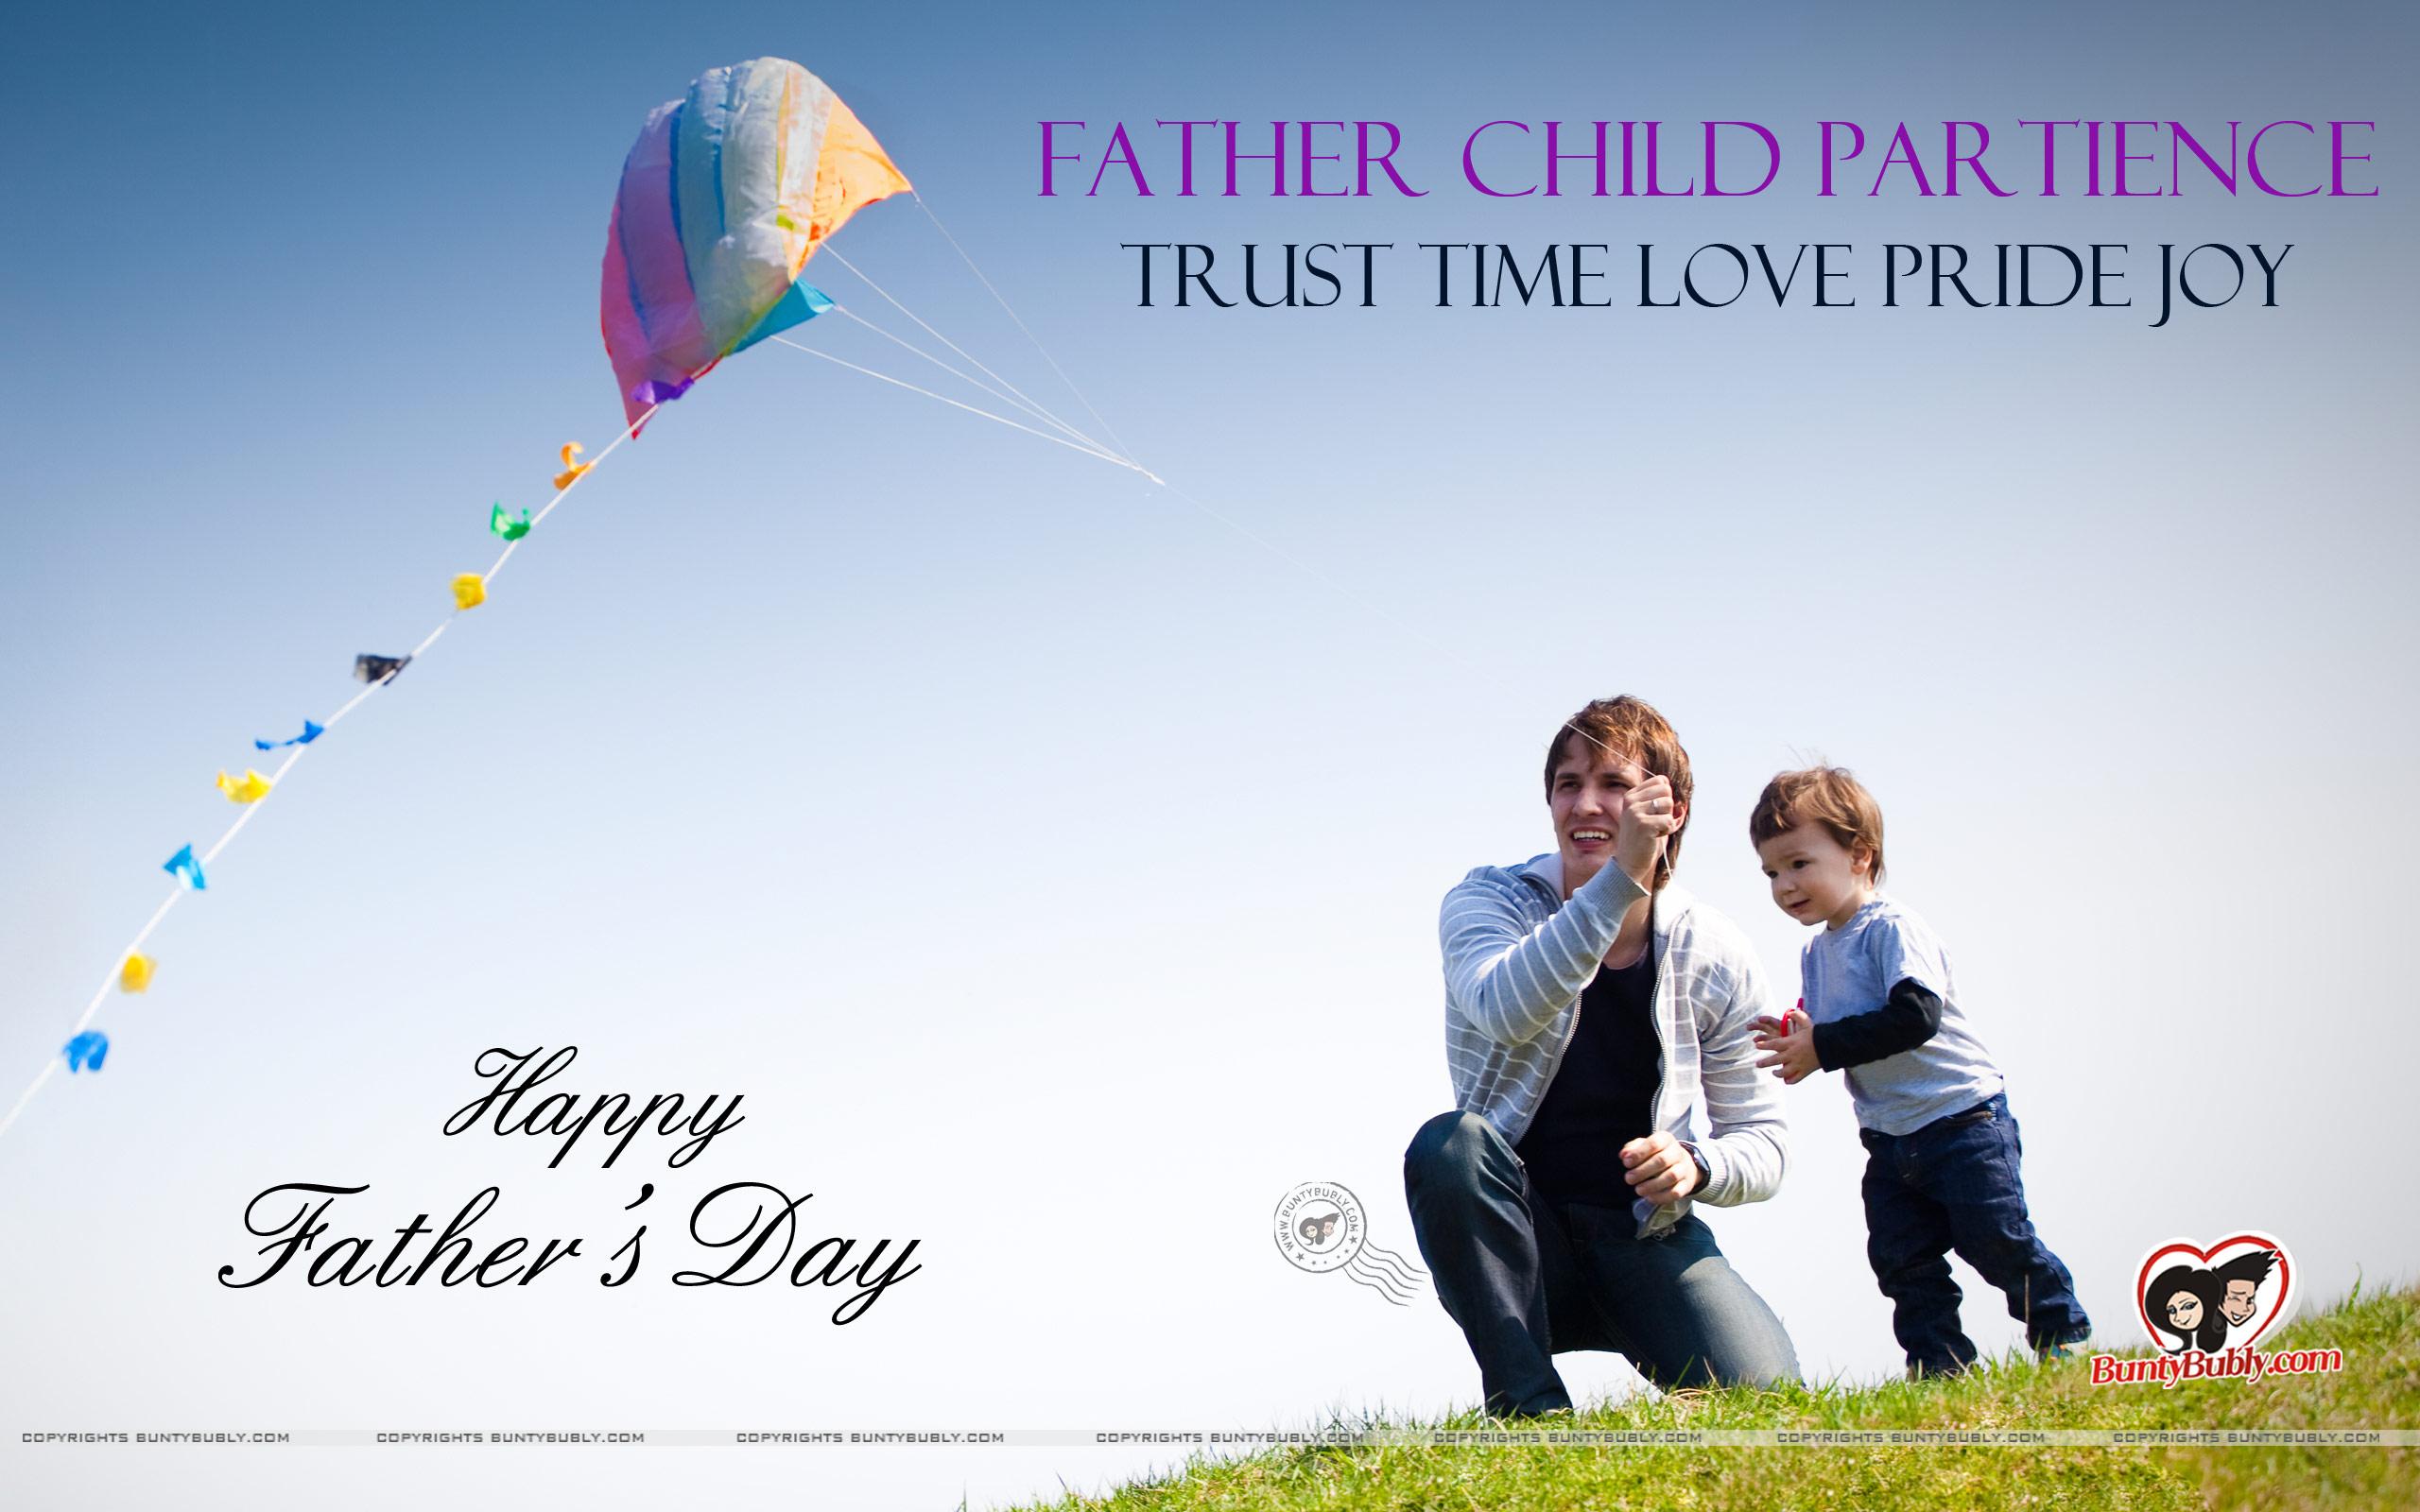 Fathers Day HD Wallpaper | Happy Fathers Day 2016 Poems, Images ...